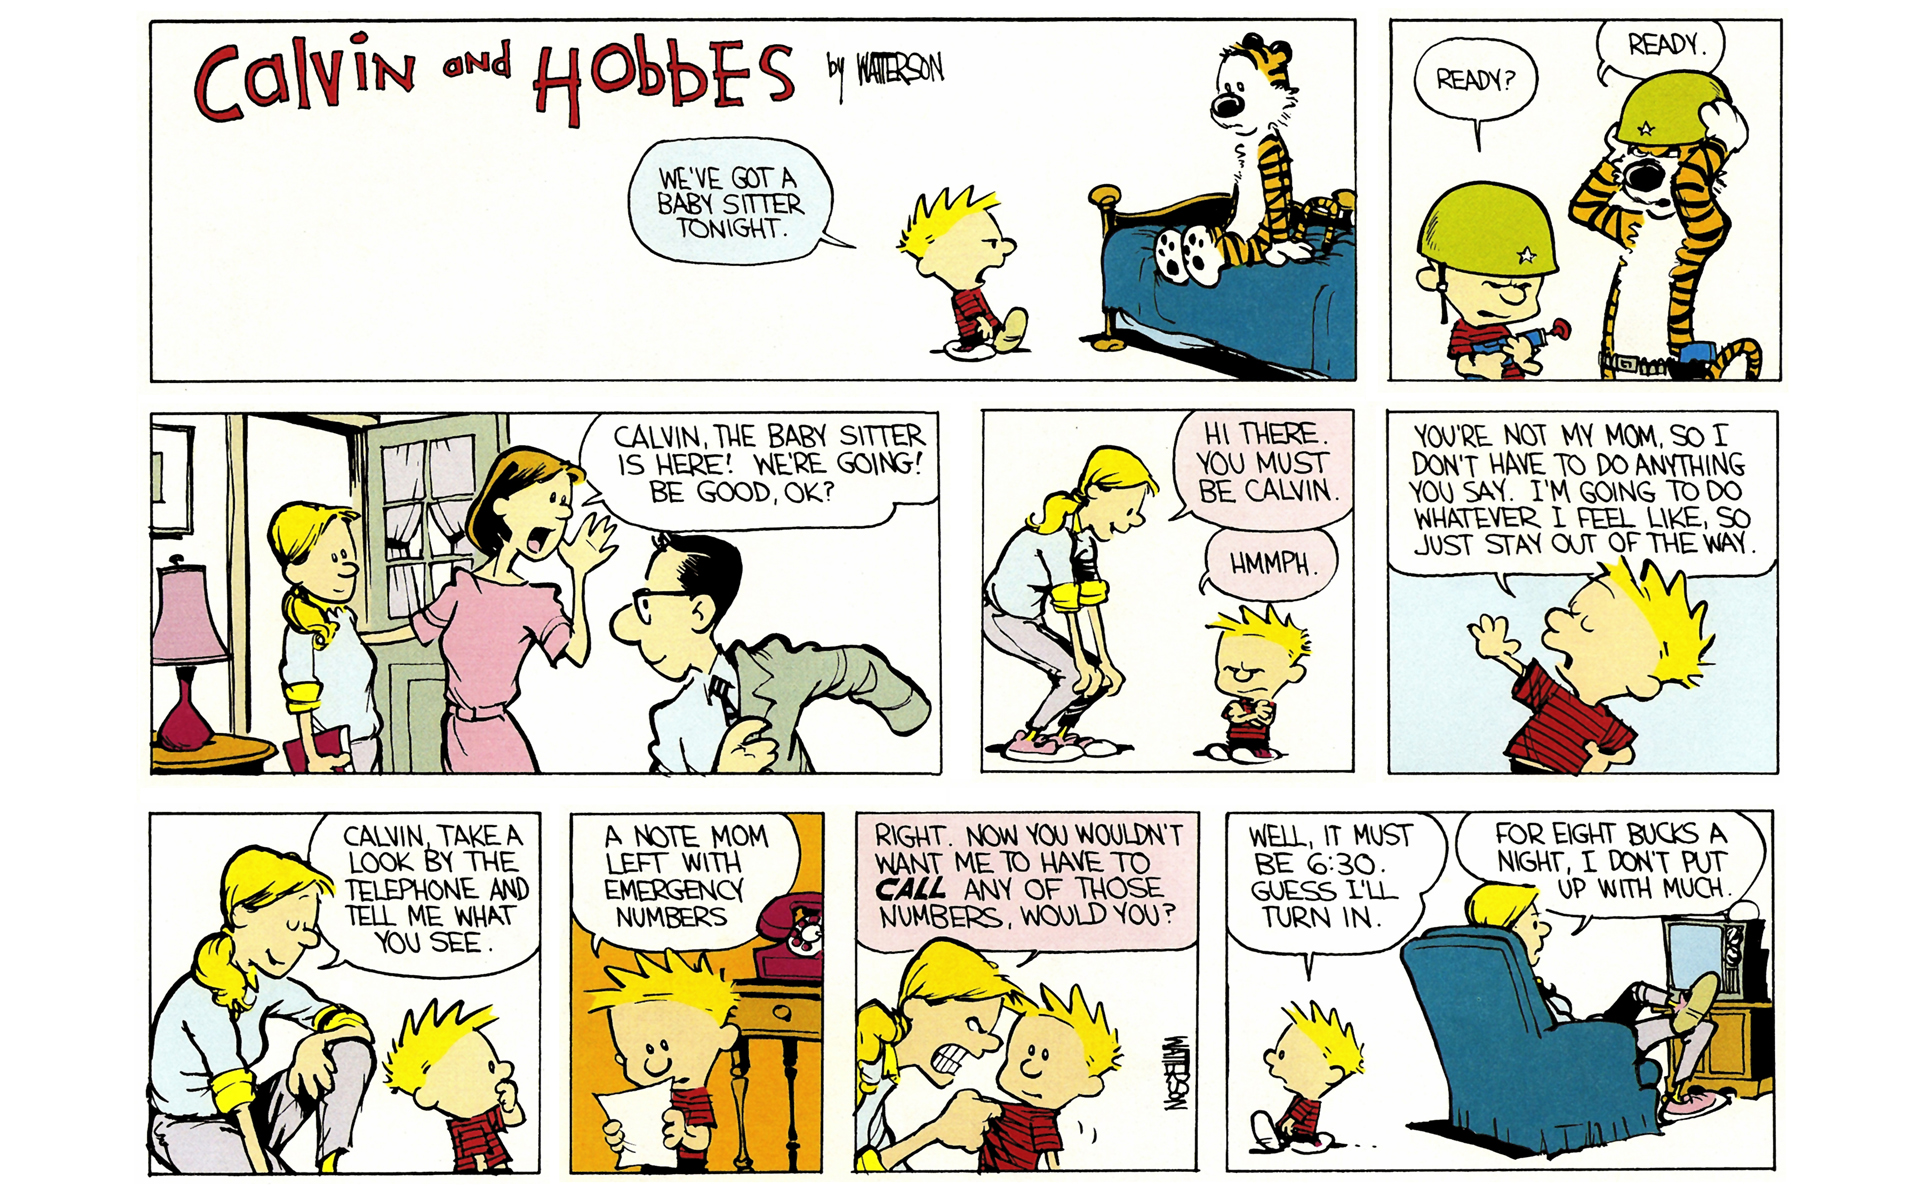 Read online Calvin and Hobbes comic - Issue #1 - 109.